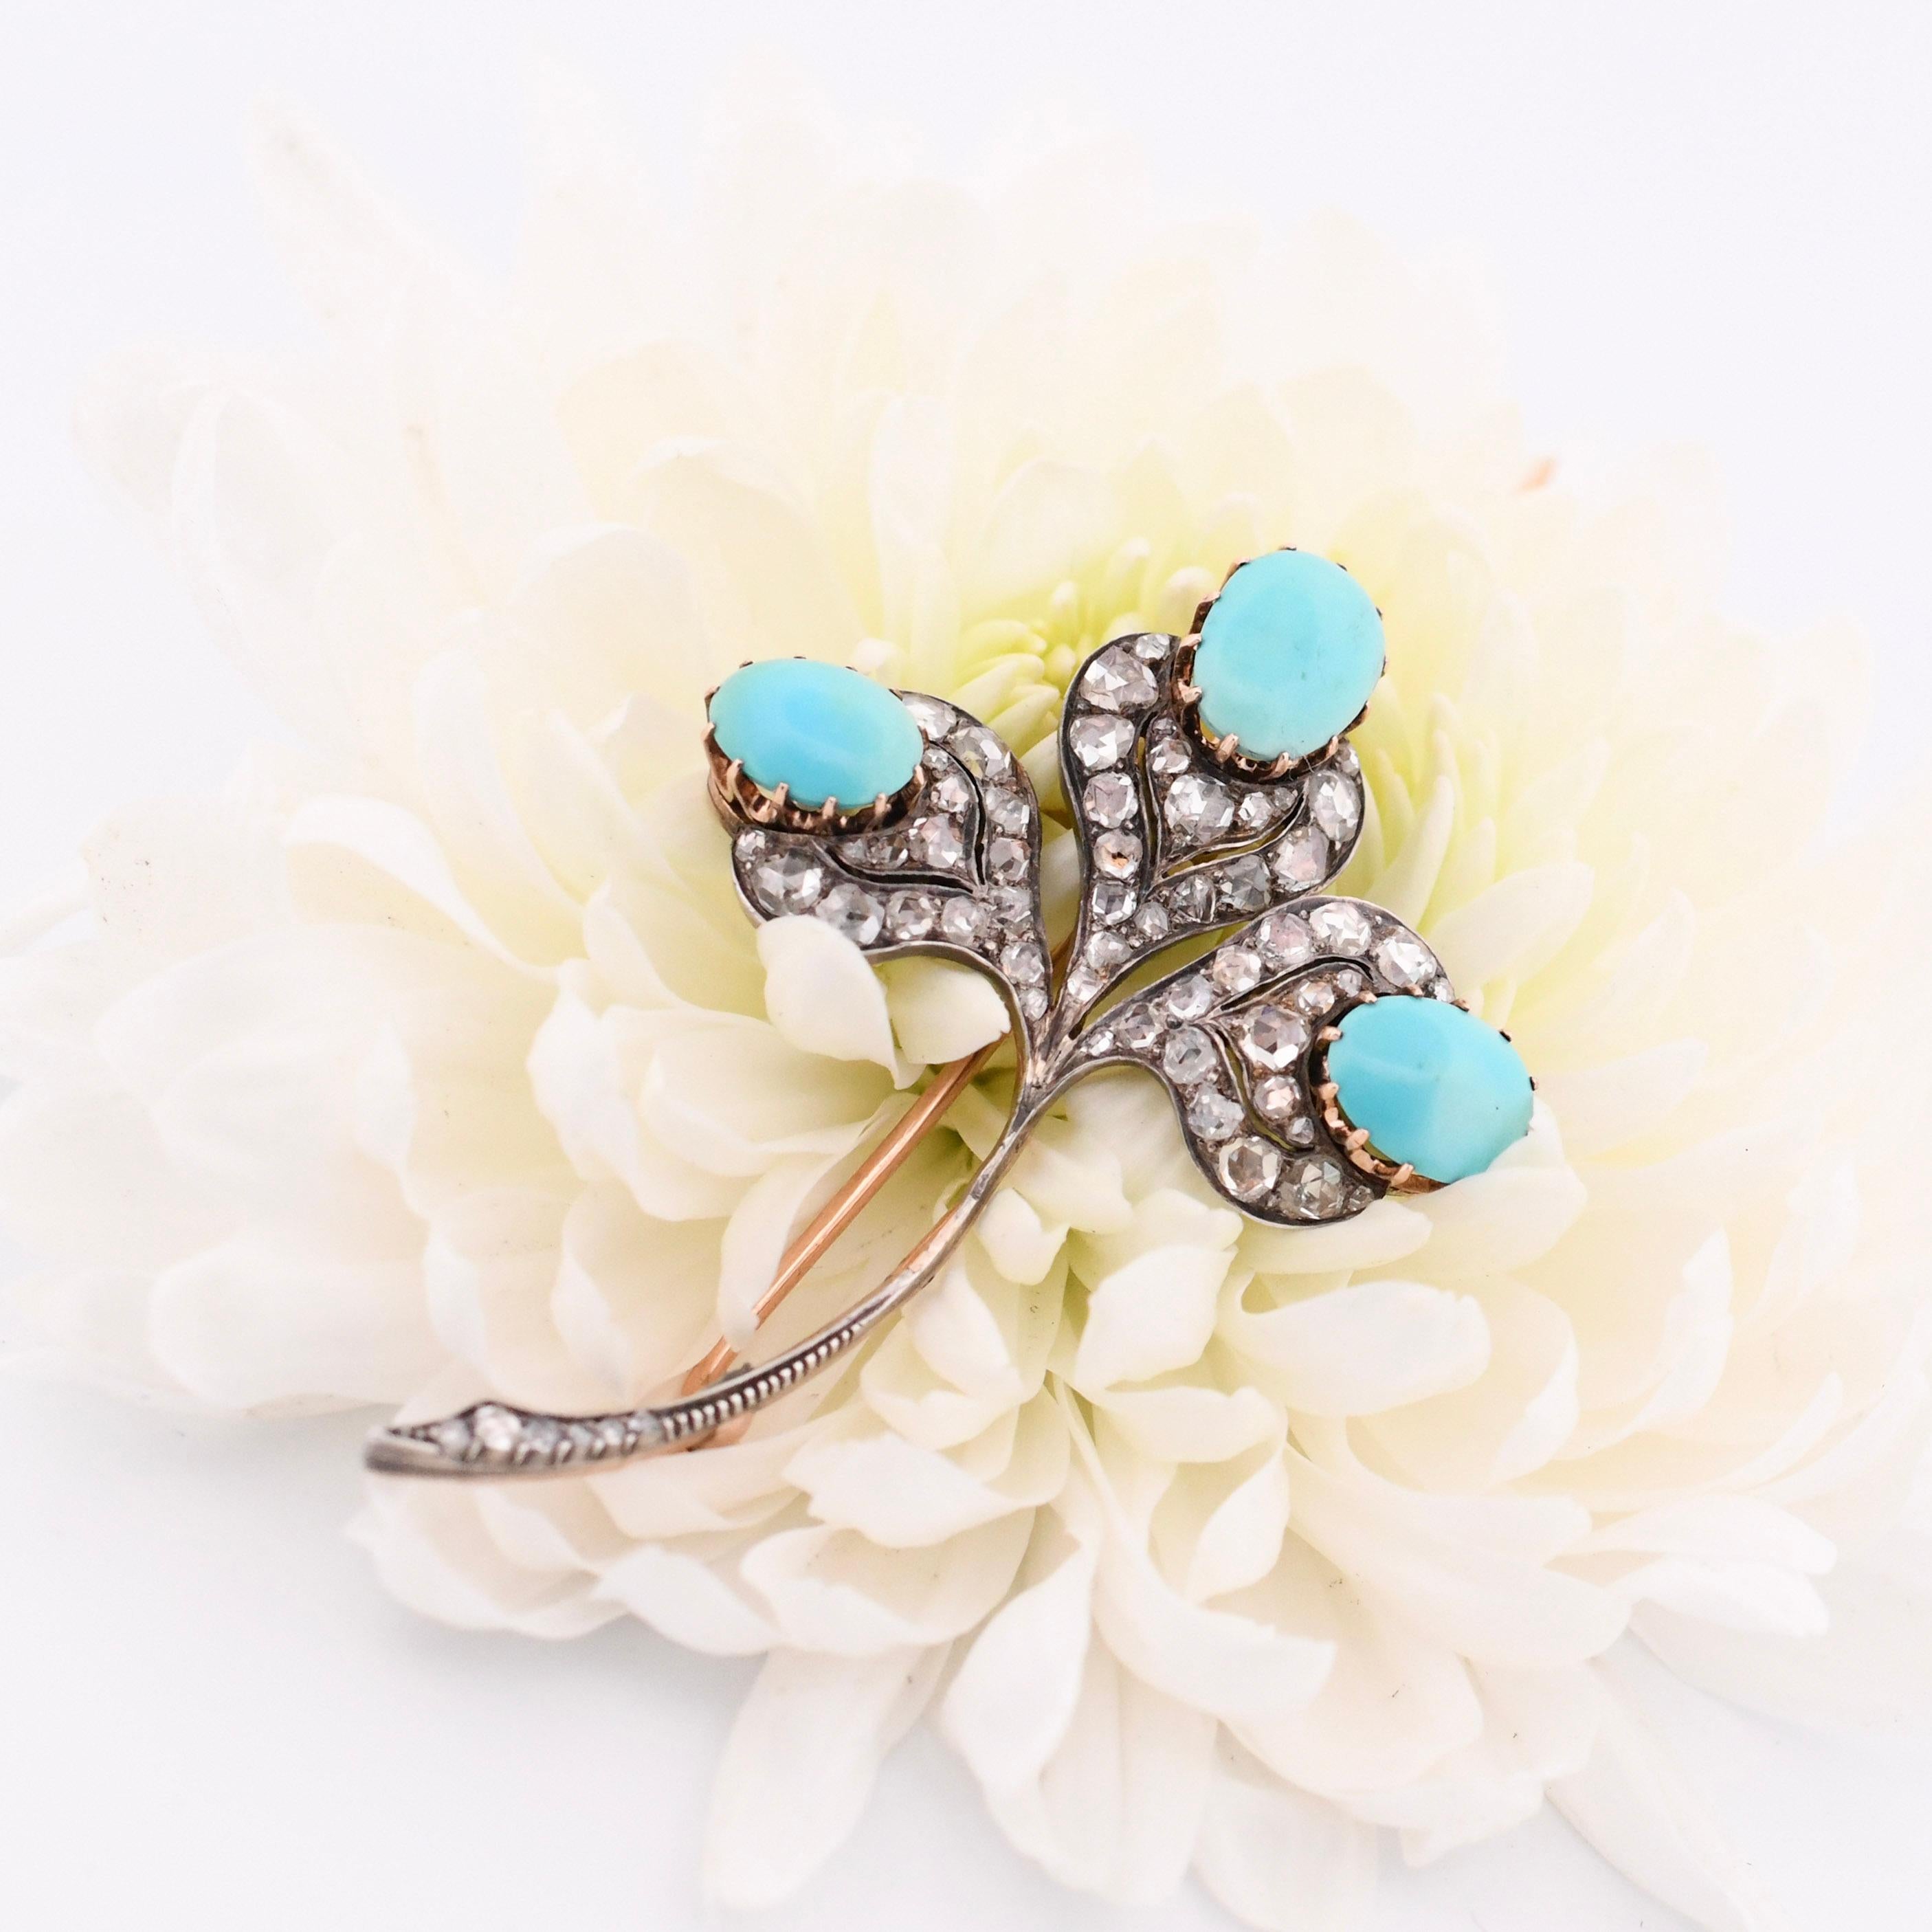 Introducing a stunning Art Deco brooch that exudes timeless elegance and charm. This exquisite piece features a clover-shaped design adorned with three captivating turquoise cabochons and dazzling rose-cut diamonds, all set in 14K yellow gold. The